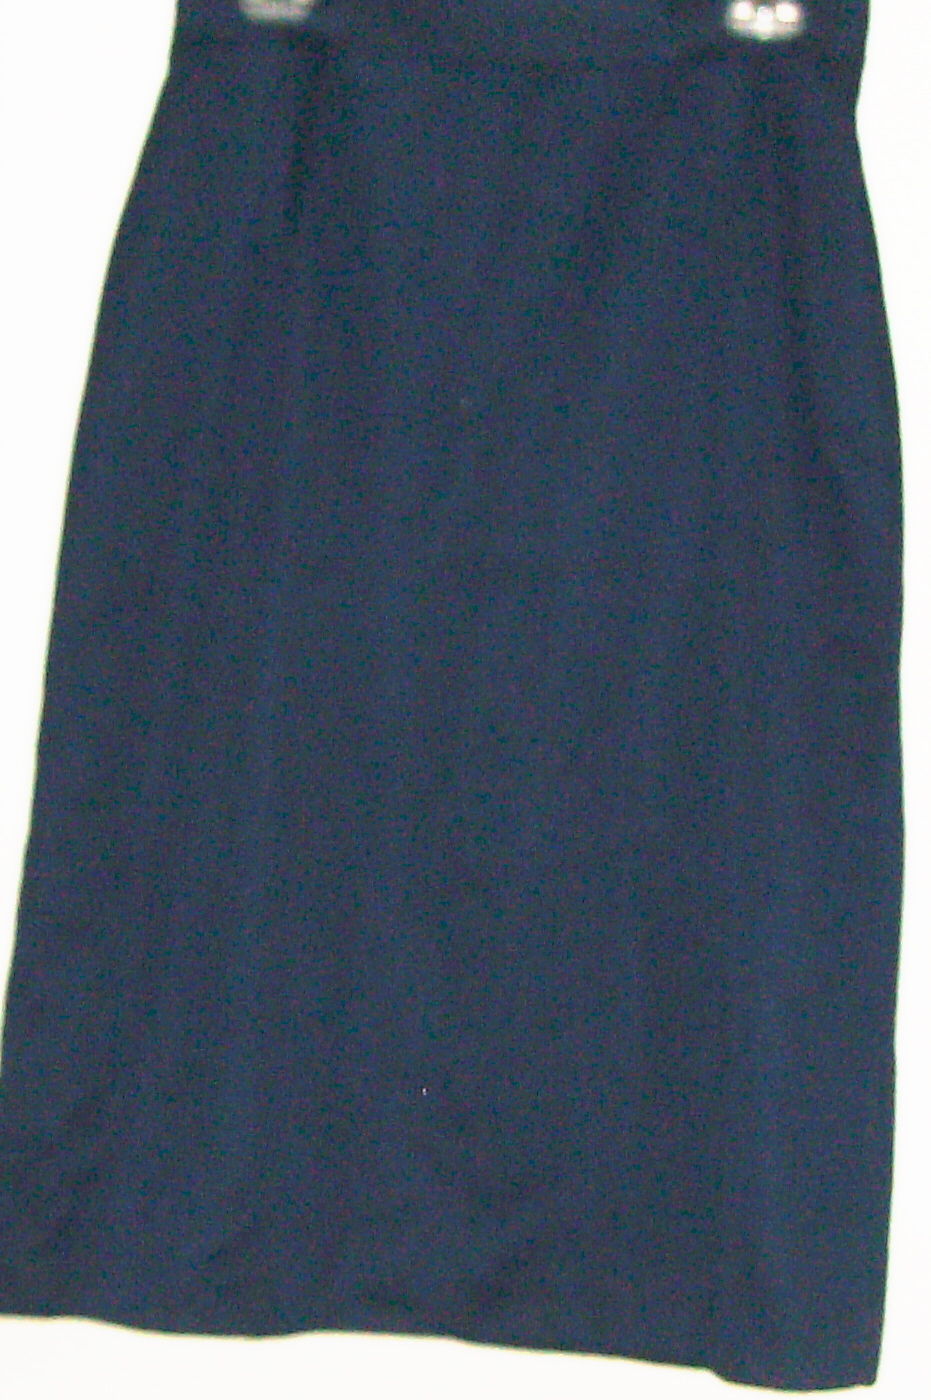 Primary image for WOMEN'S BLUE FITTED WAIST FRONT SPLIT SKIRT SIZE 10